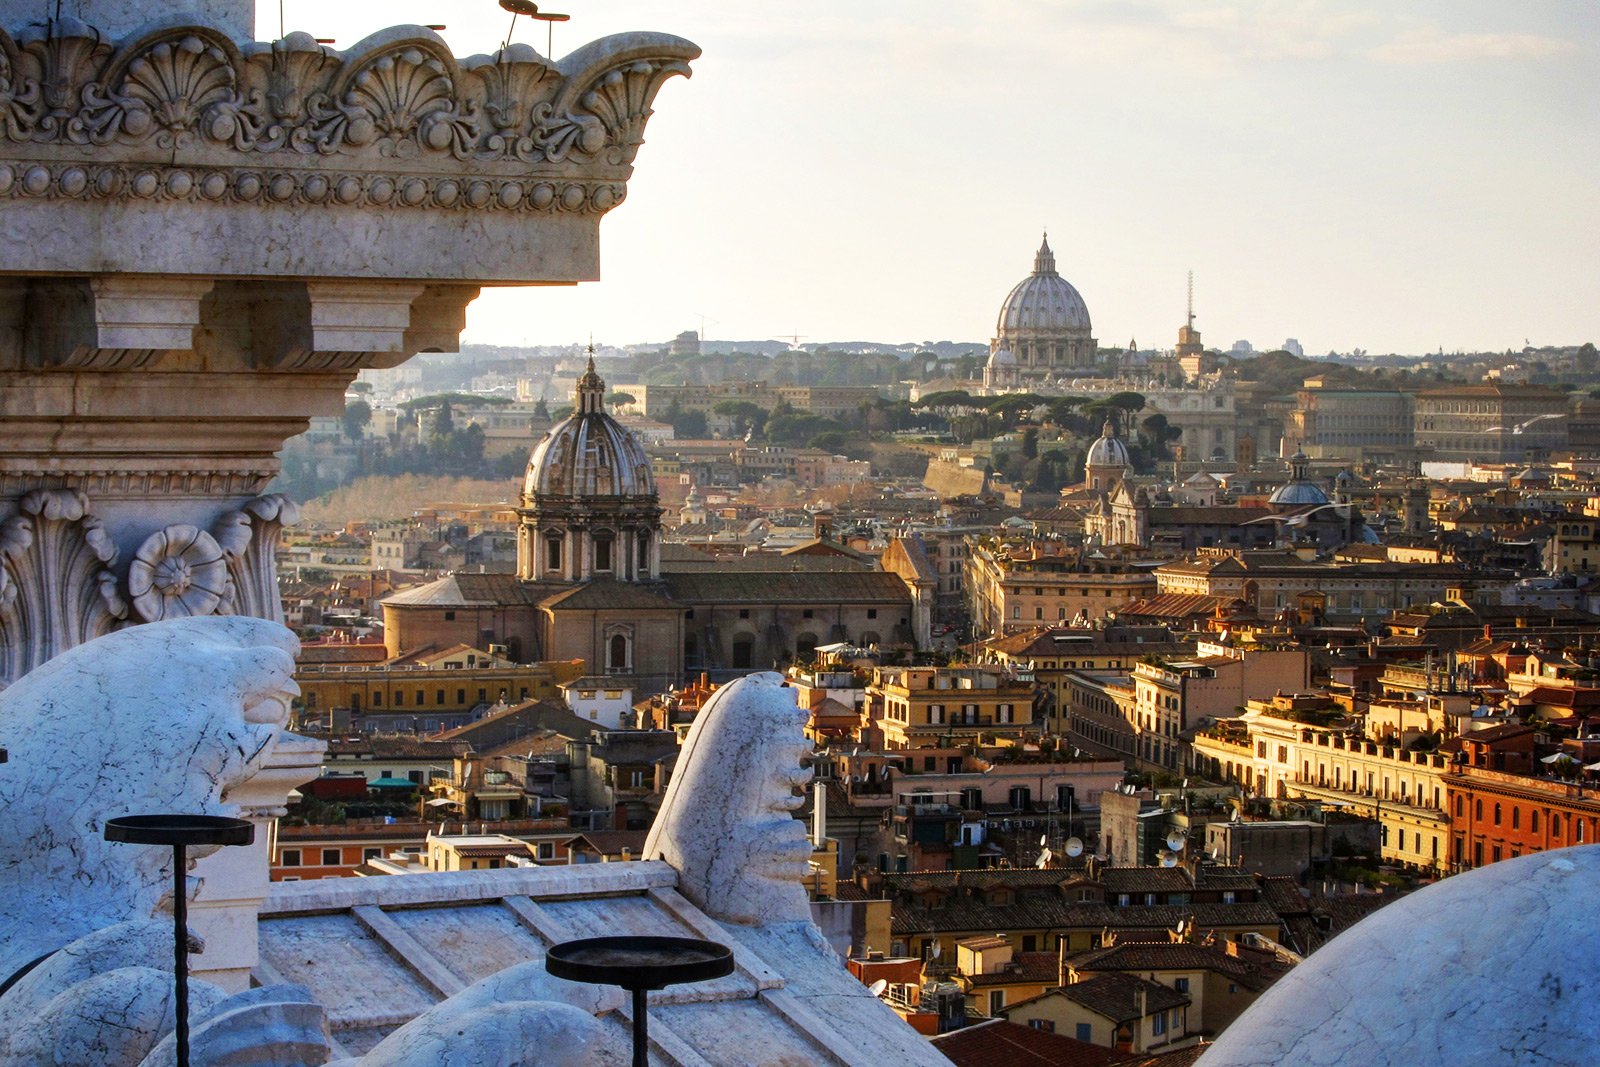 How to climb to the roof of the Altar of the Fatherland in Rome